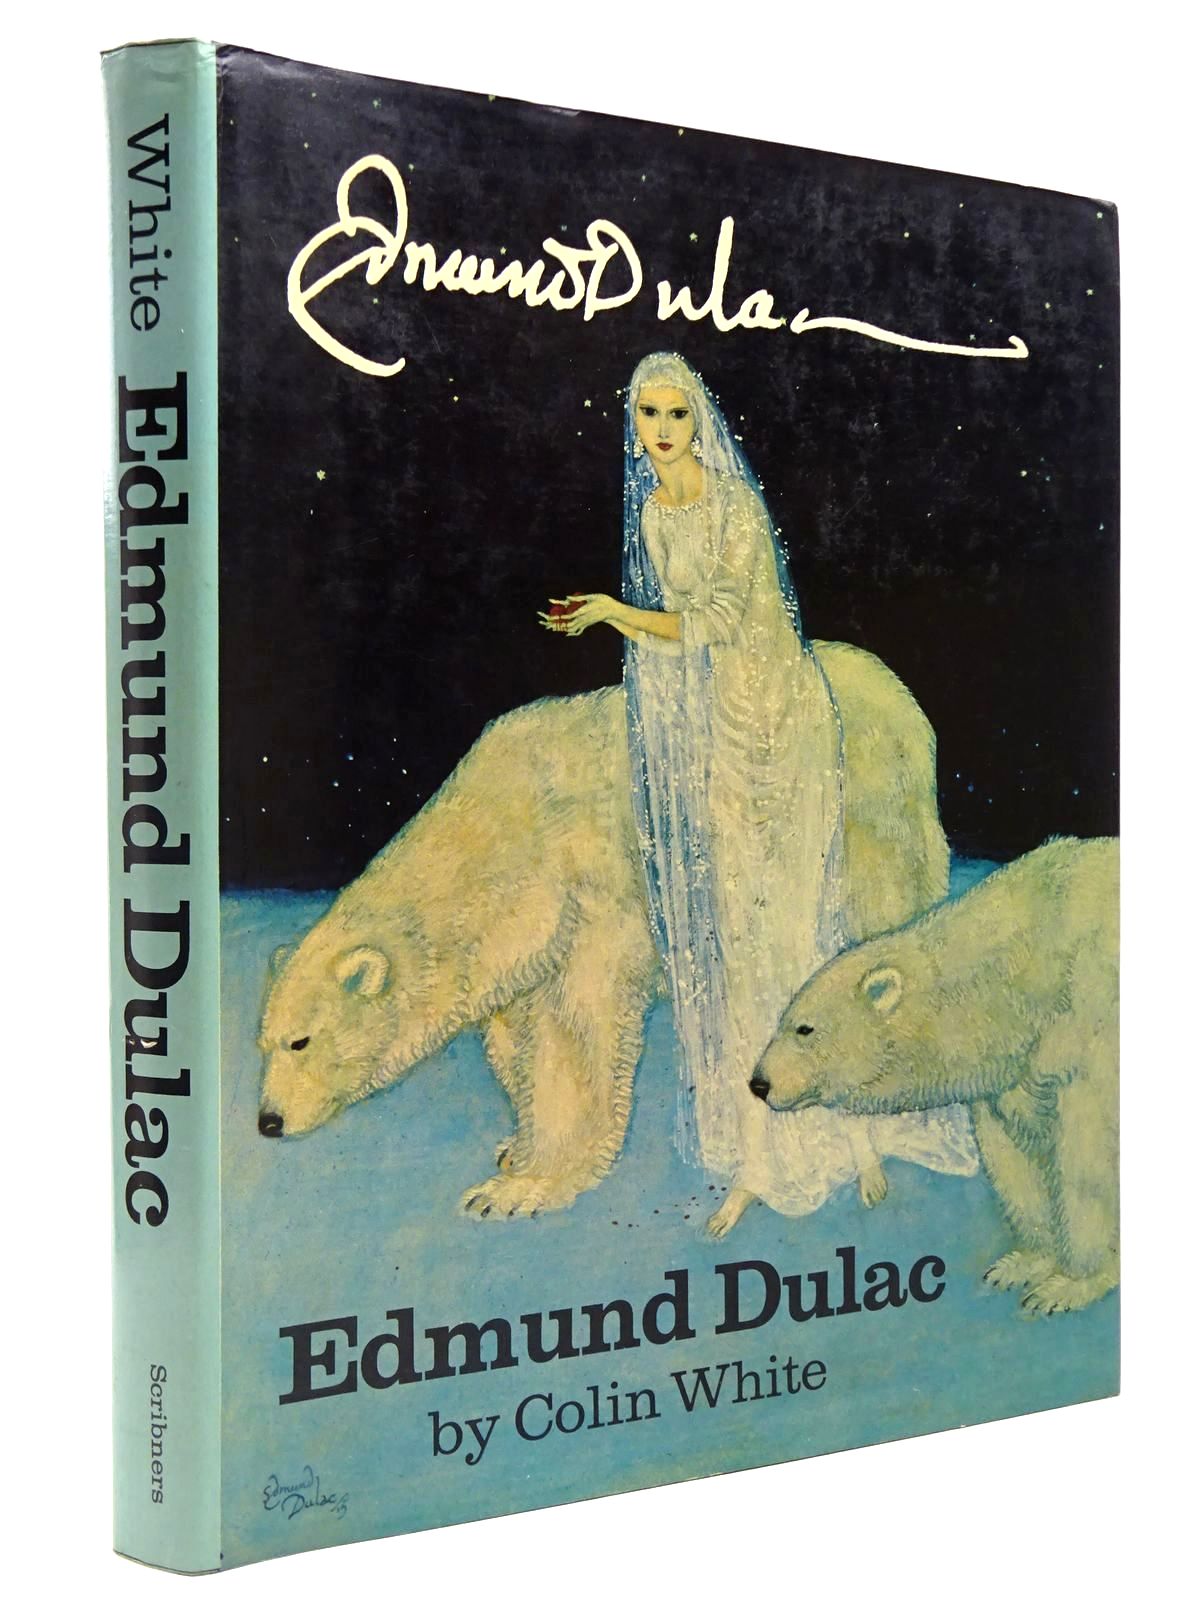 Photo of EDMUND DULAC written by Dulac, Edmund
White, Colin illustrated by Dulac, Edmund published by Charles Scribner's Sons (STOCK CODE: 2129627)  for sale by Stella & Rose's Books